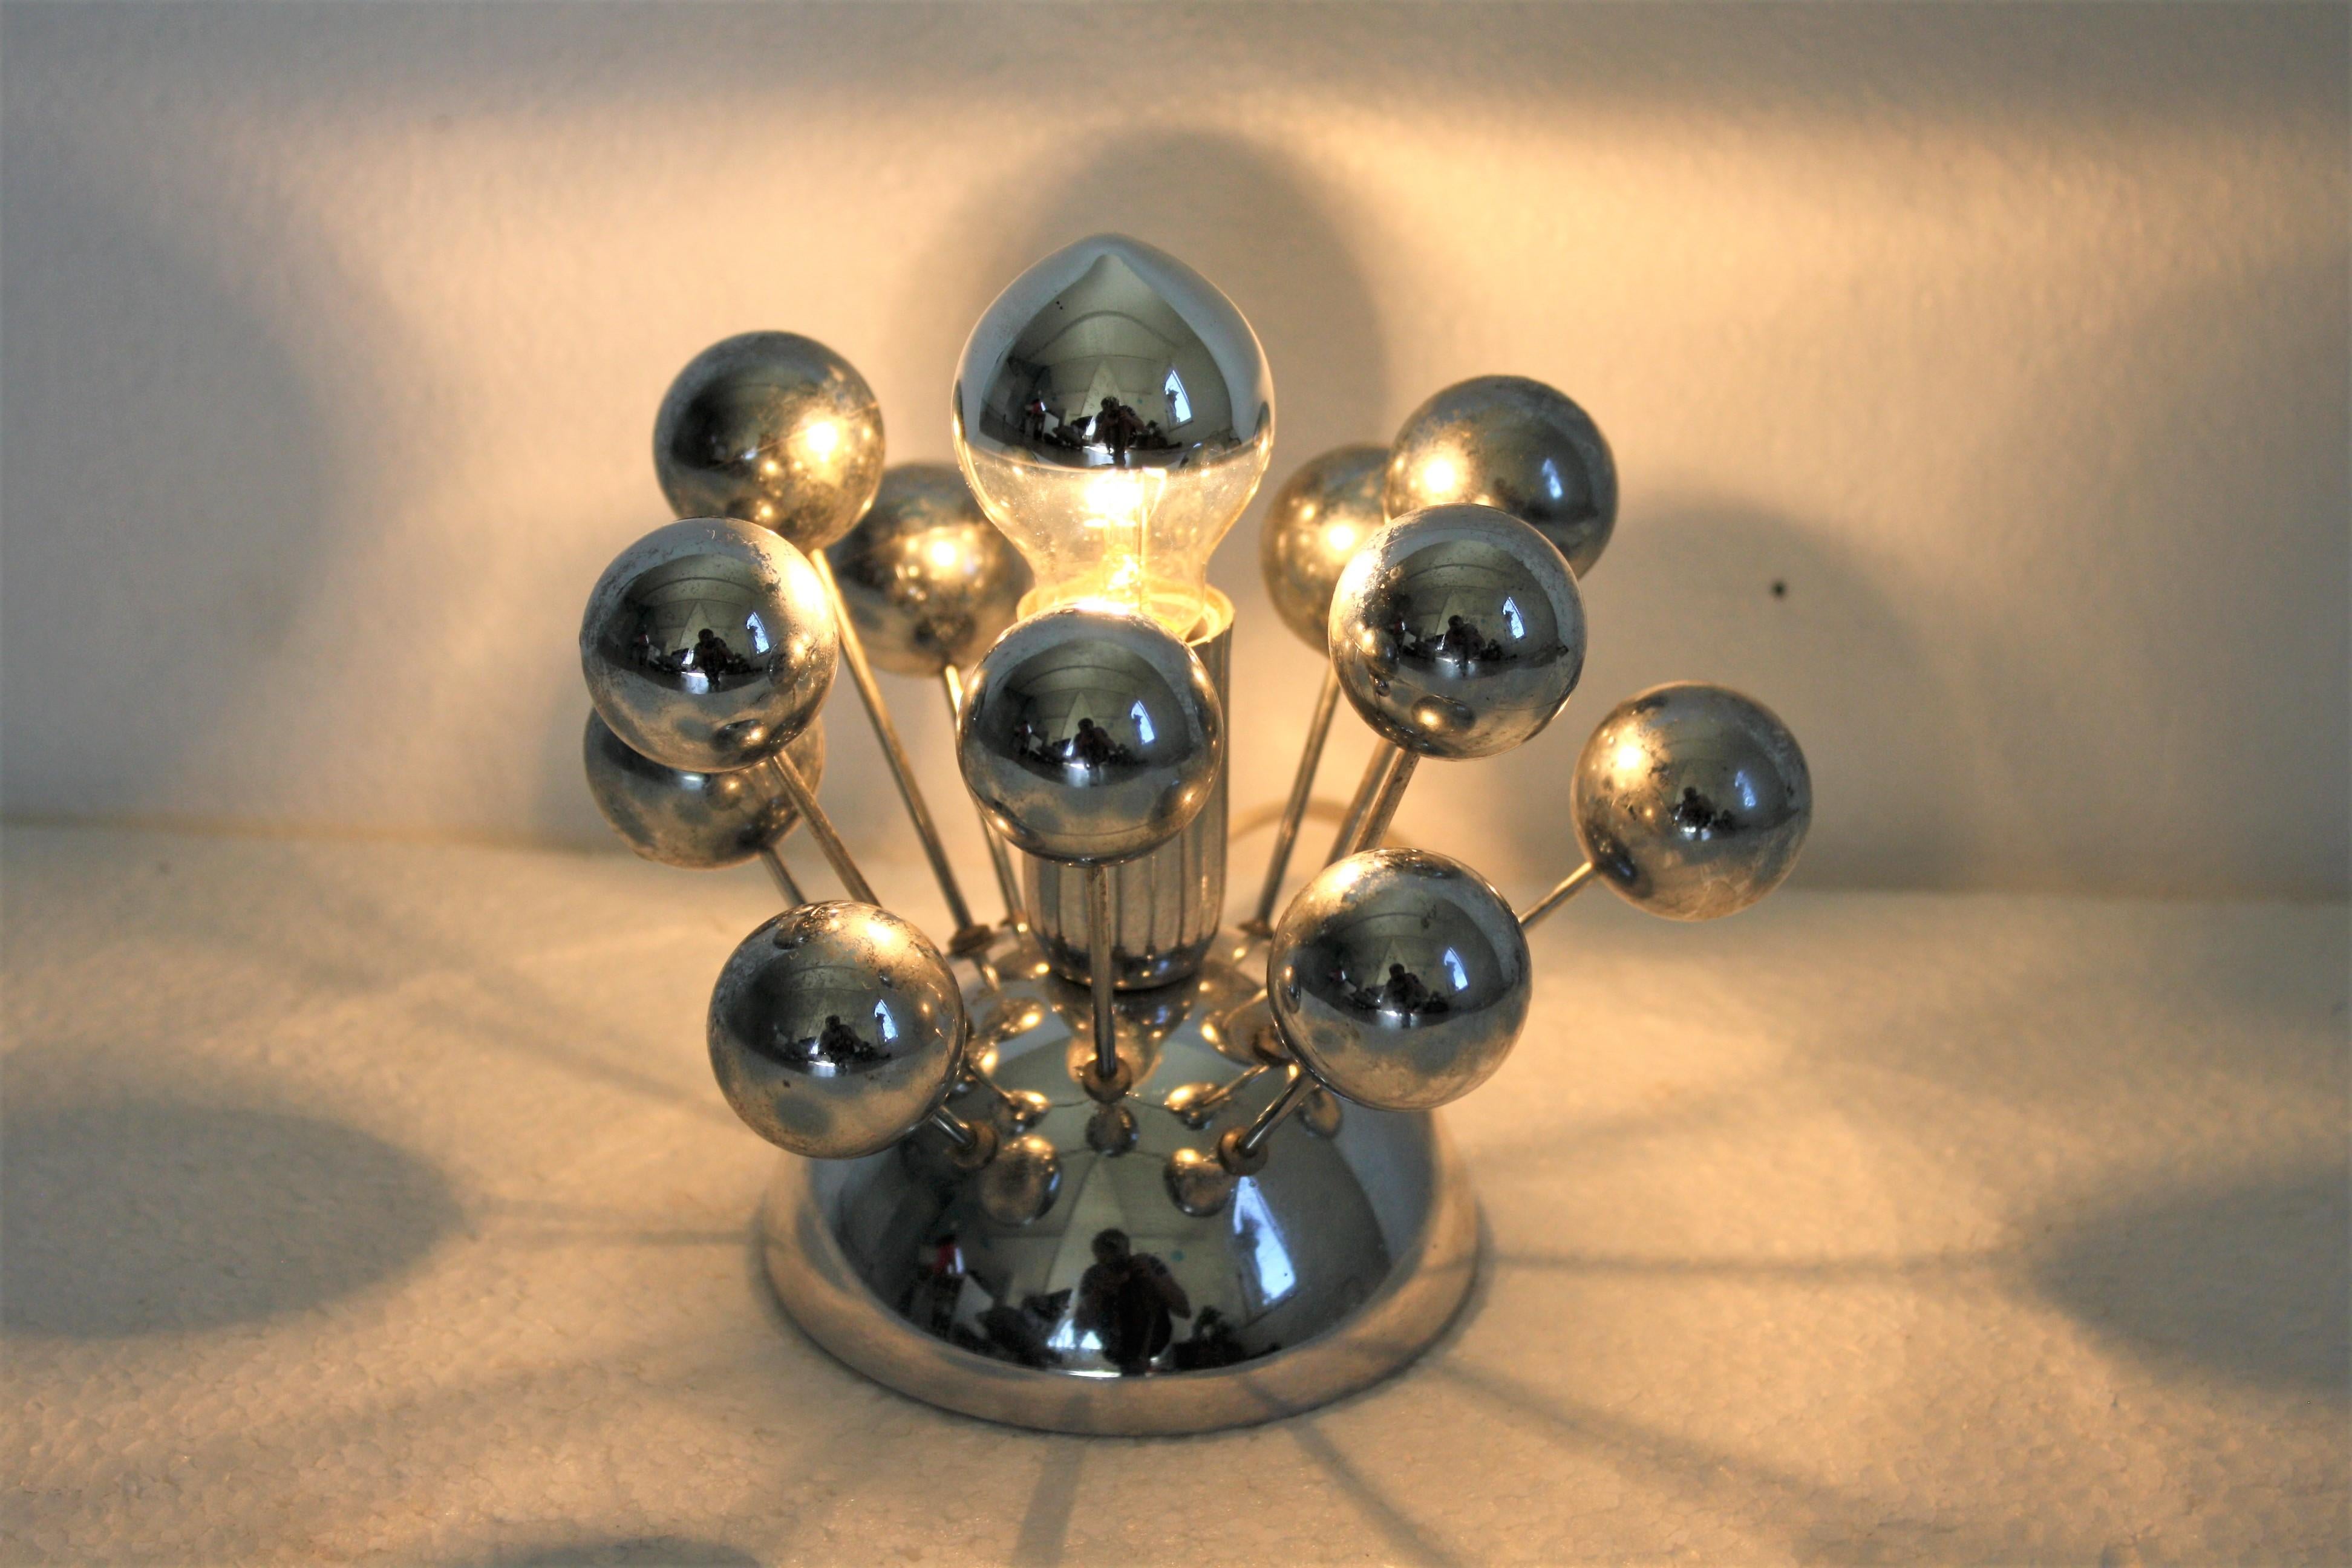 Rare small Sputnik table lamp.

Just like the famous Sputnik chandeliers, this table lamp consists of chromed plastic spheres mounted on chromed steel arms.

It has one center mirrored E14 light bulb.

Ideal to use as a bedside lamp.

It